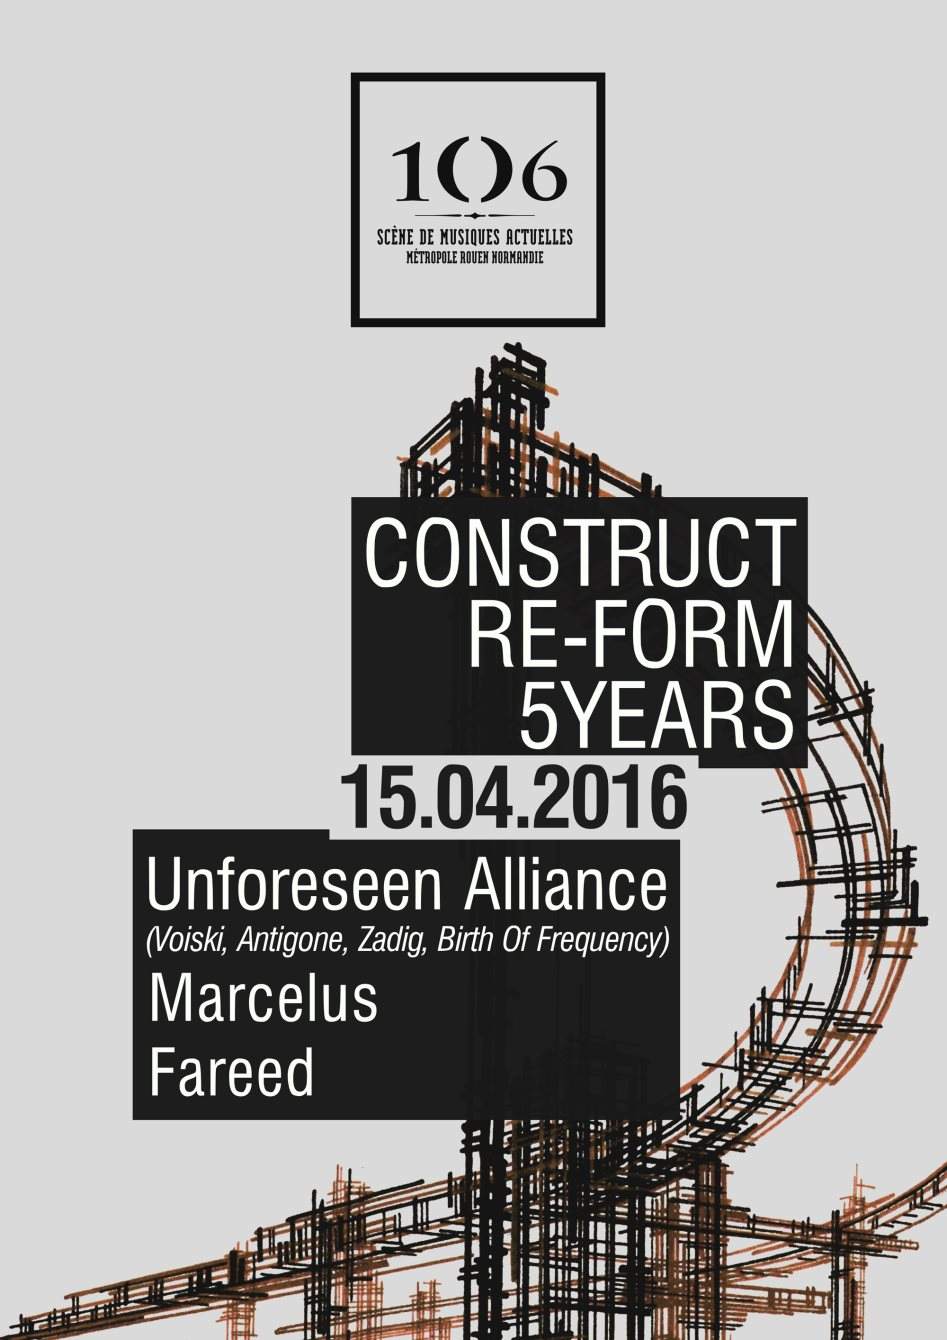 Construct Re-Form 5 Years with Unforeseen Alliance, Fareed & Marcelus - フライヤー表